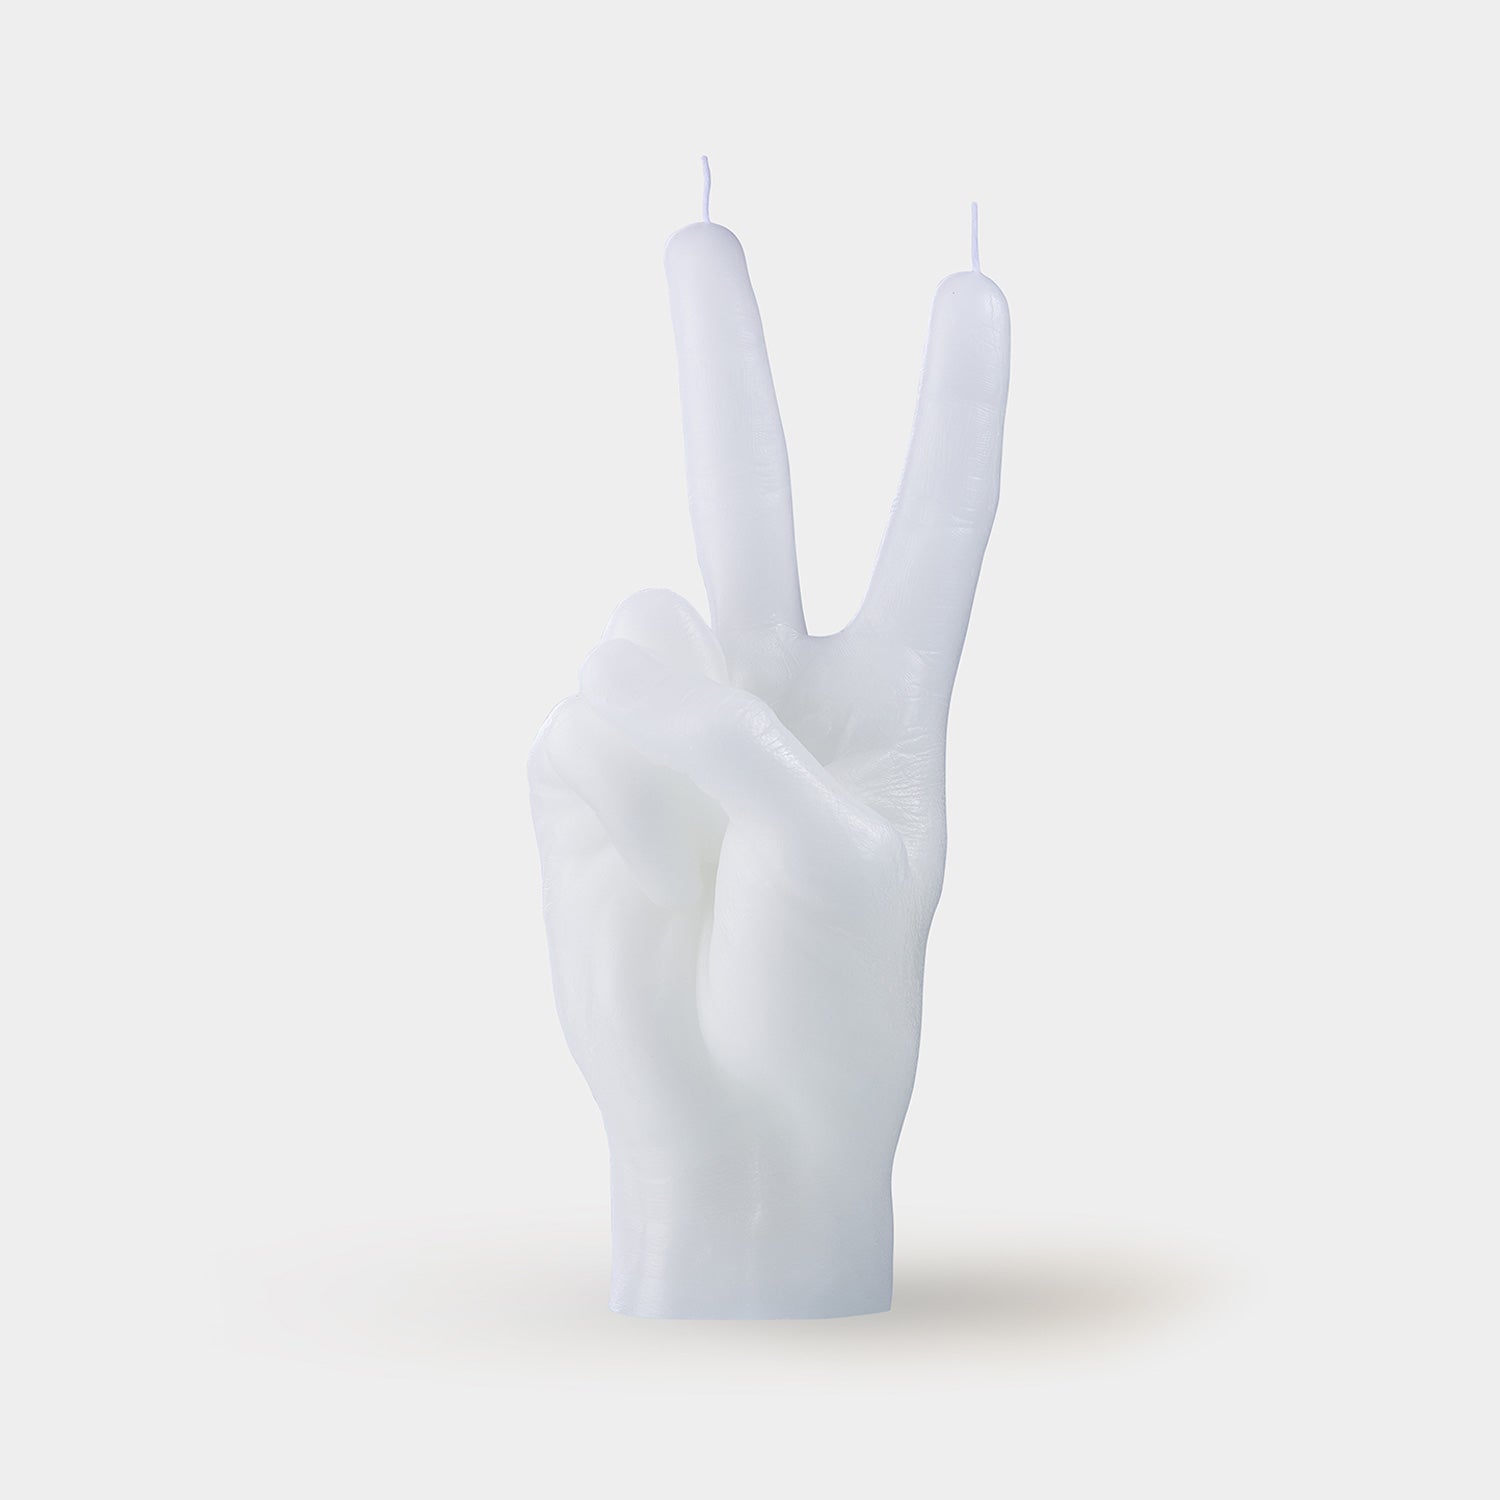 CandleHand "Peace" Candle - White